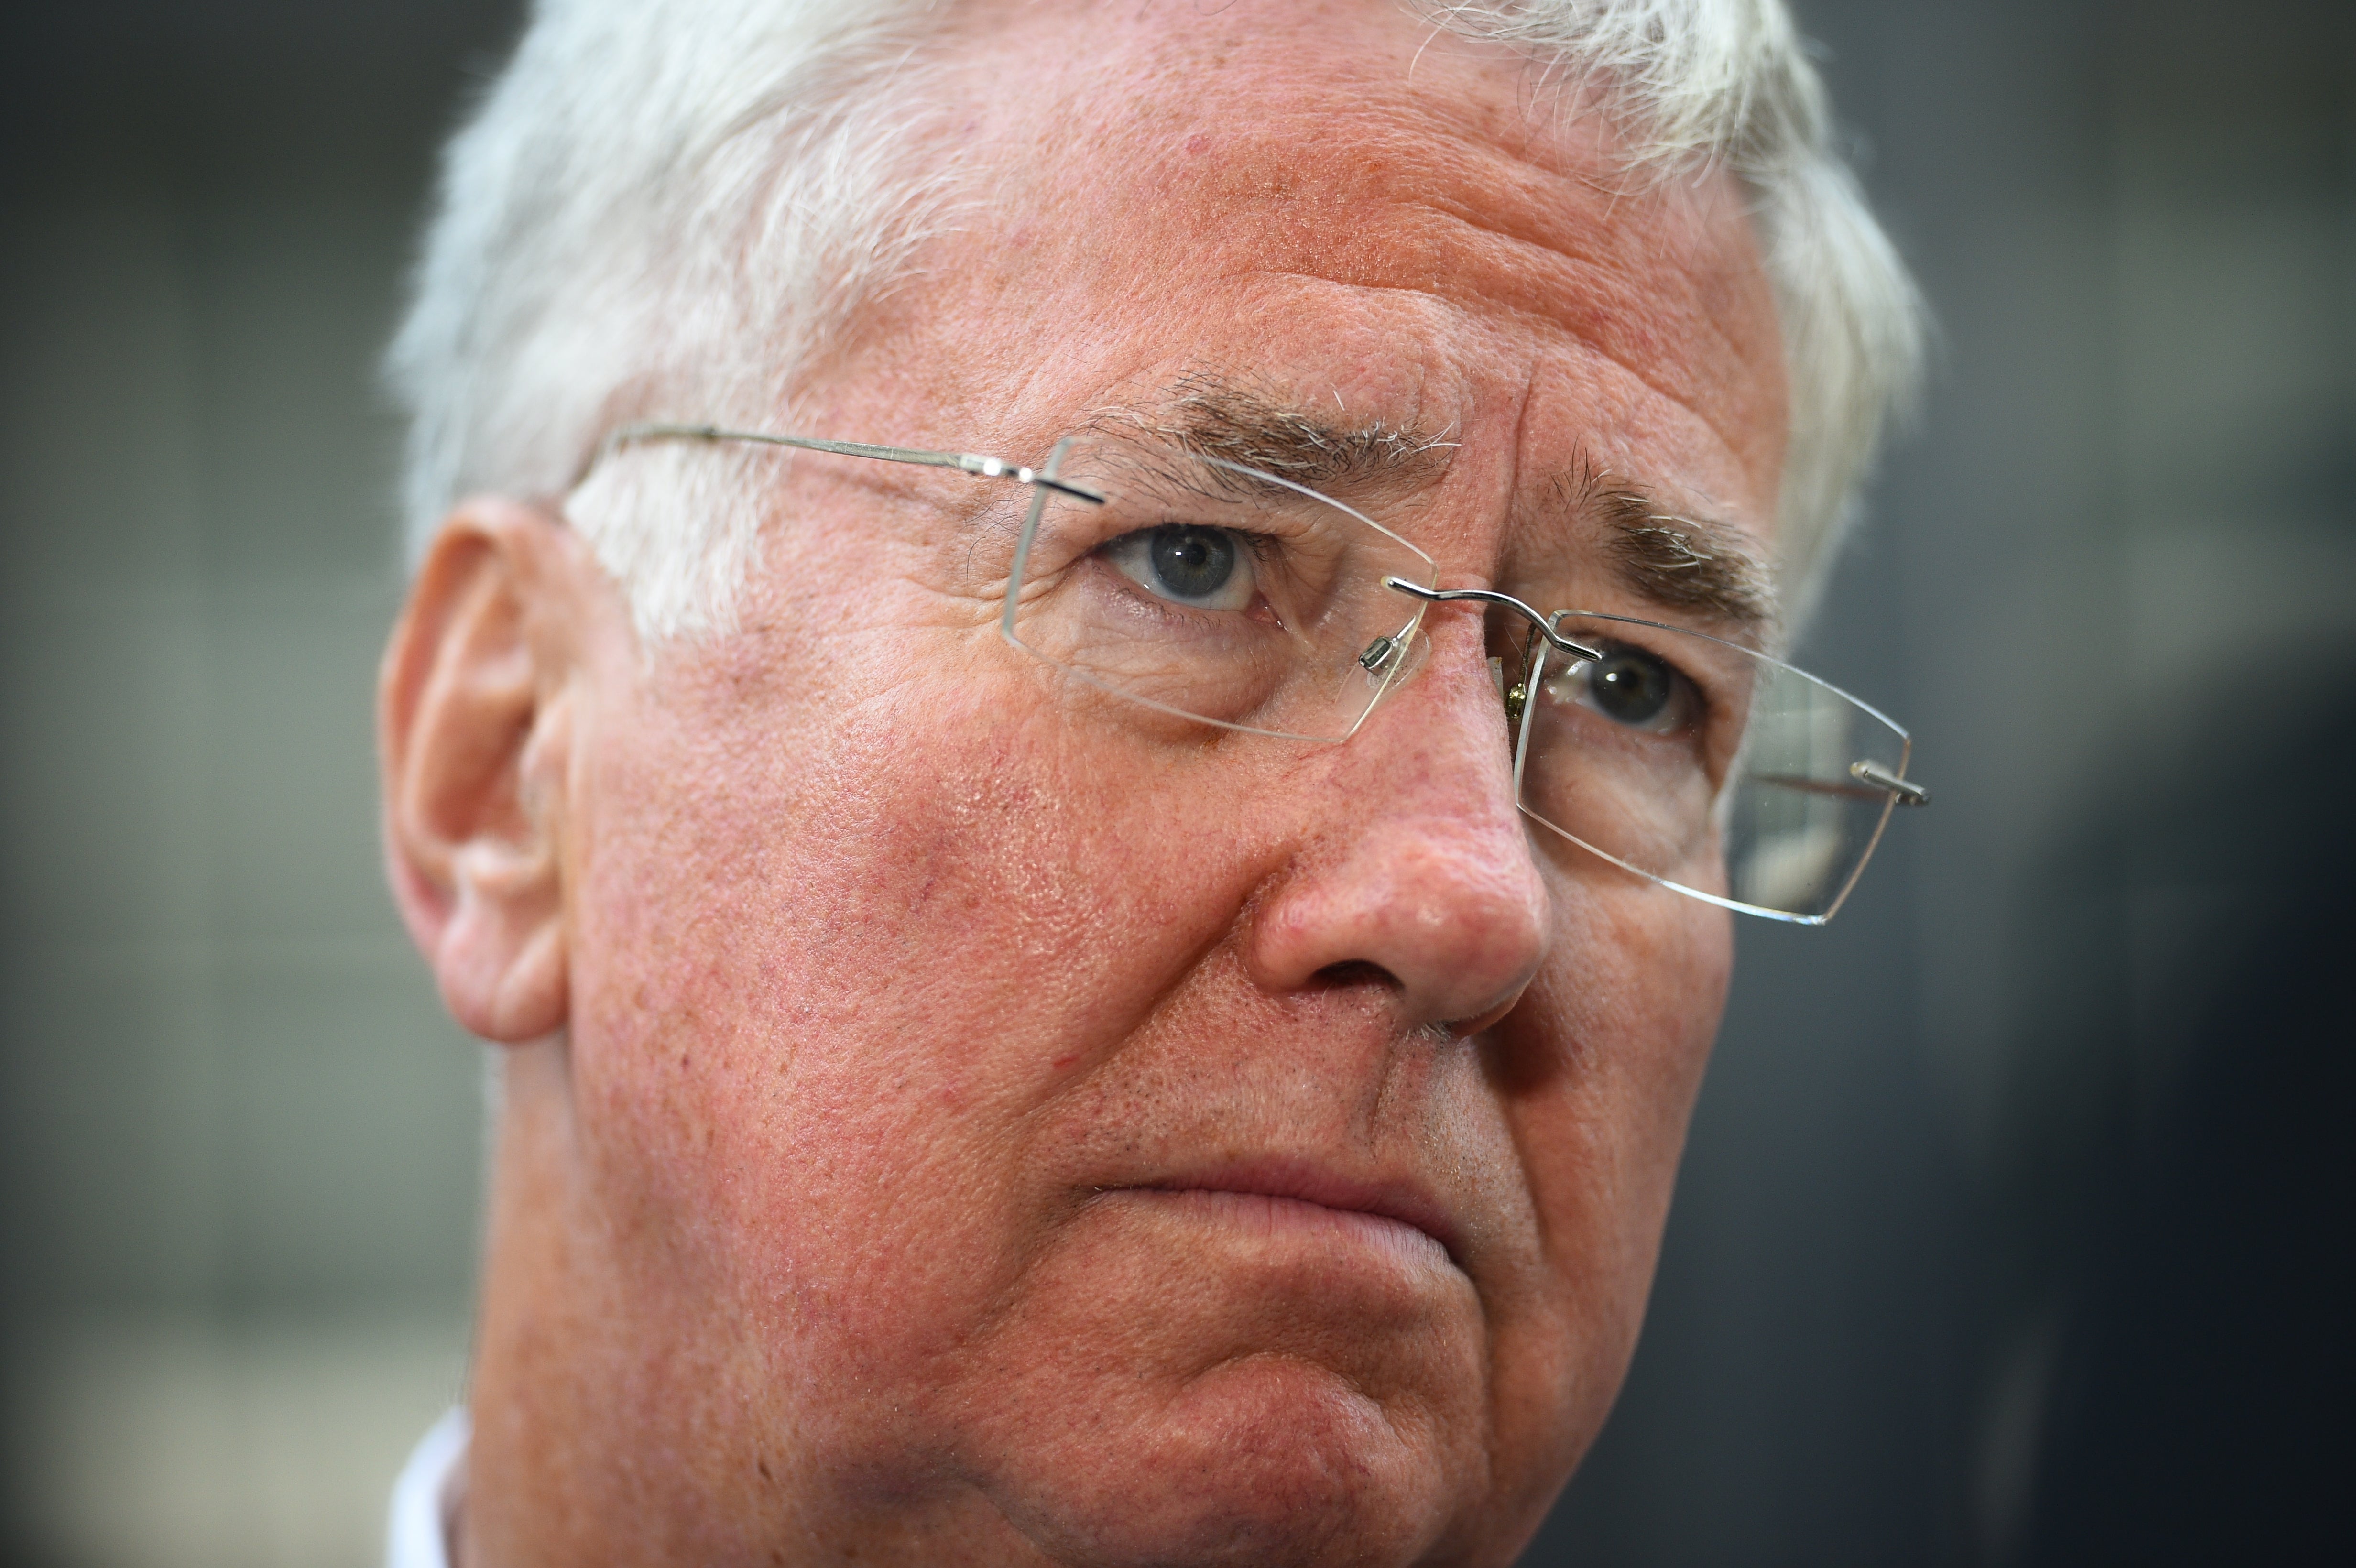 Former Tory defence secretary Michael Fallon said it was ‘absurd’ he was told not to send arms to Ukraine when Crimea was annexed (Kirsty O’Connor/PA)